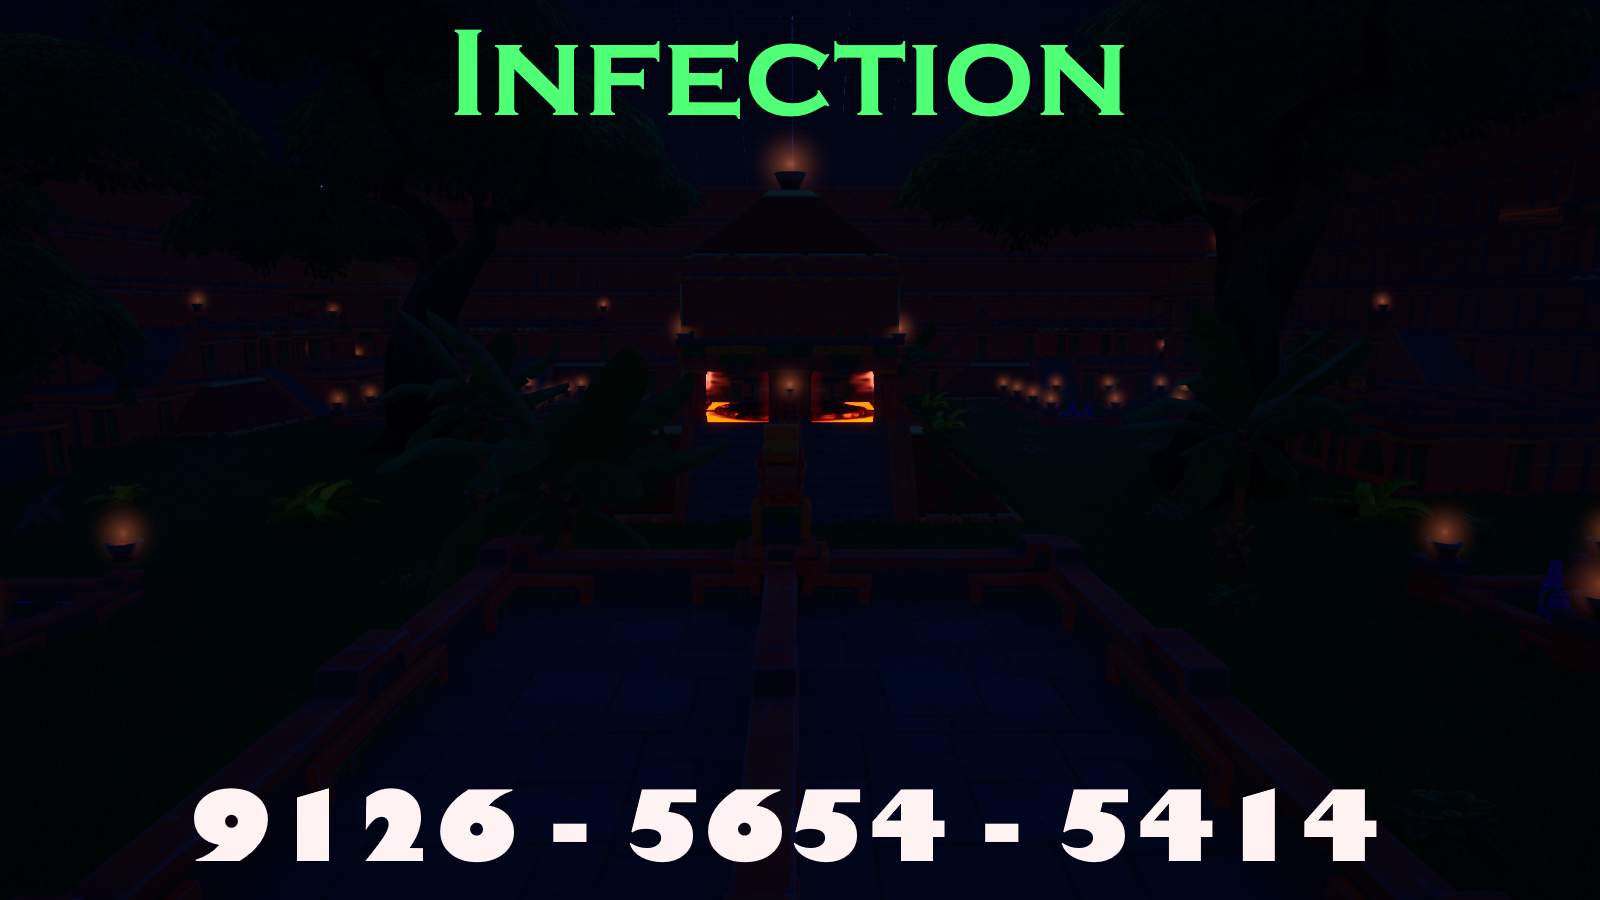 INFECTION